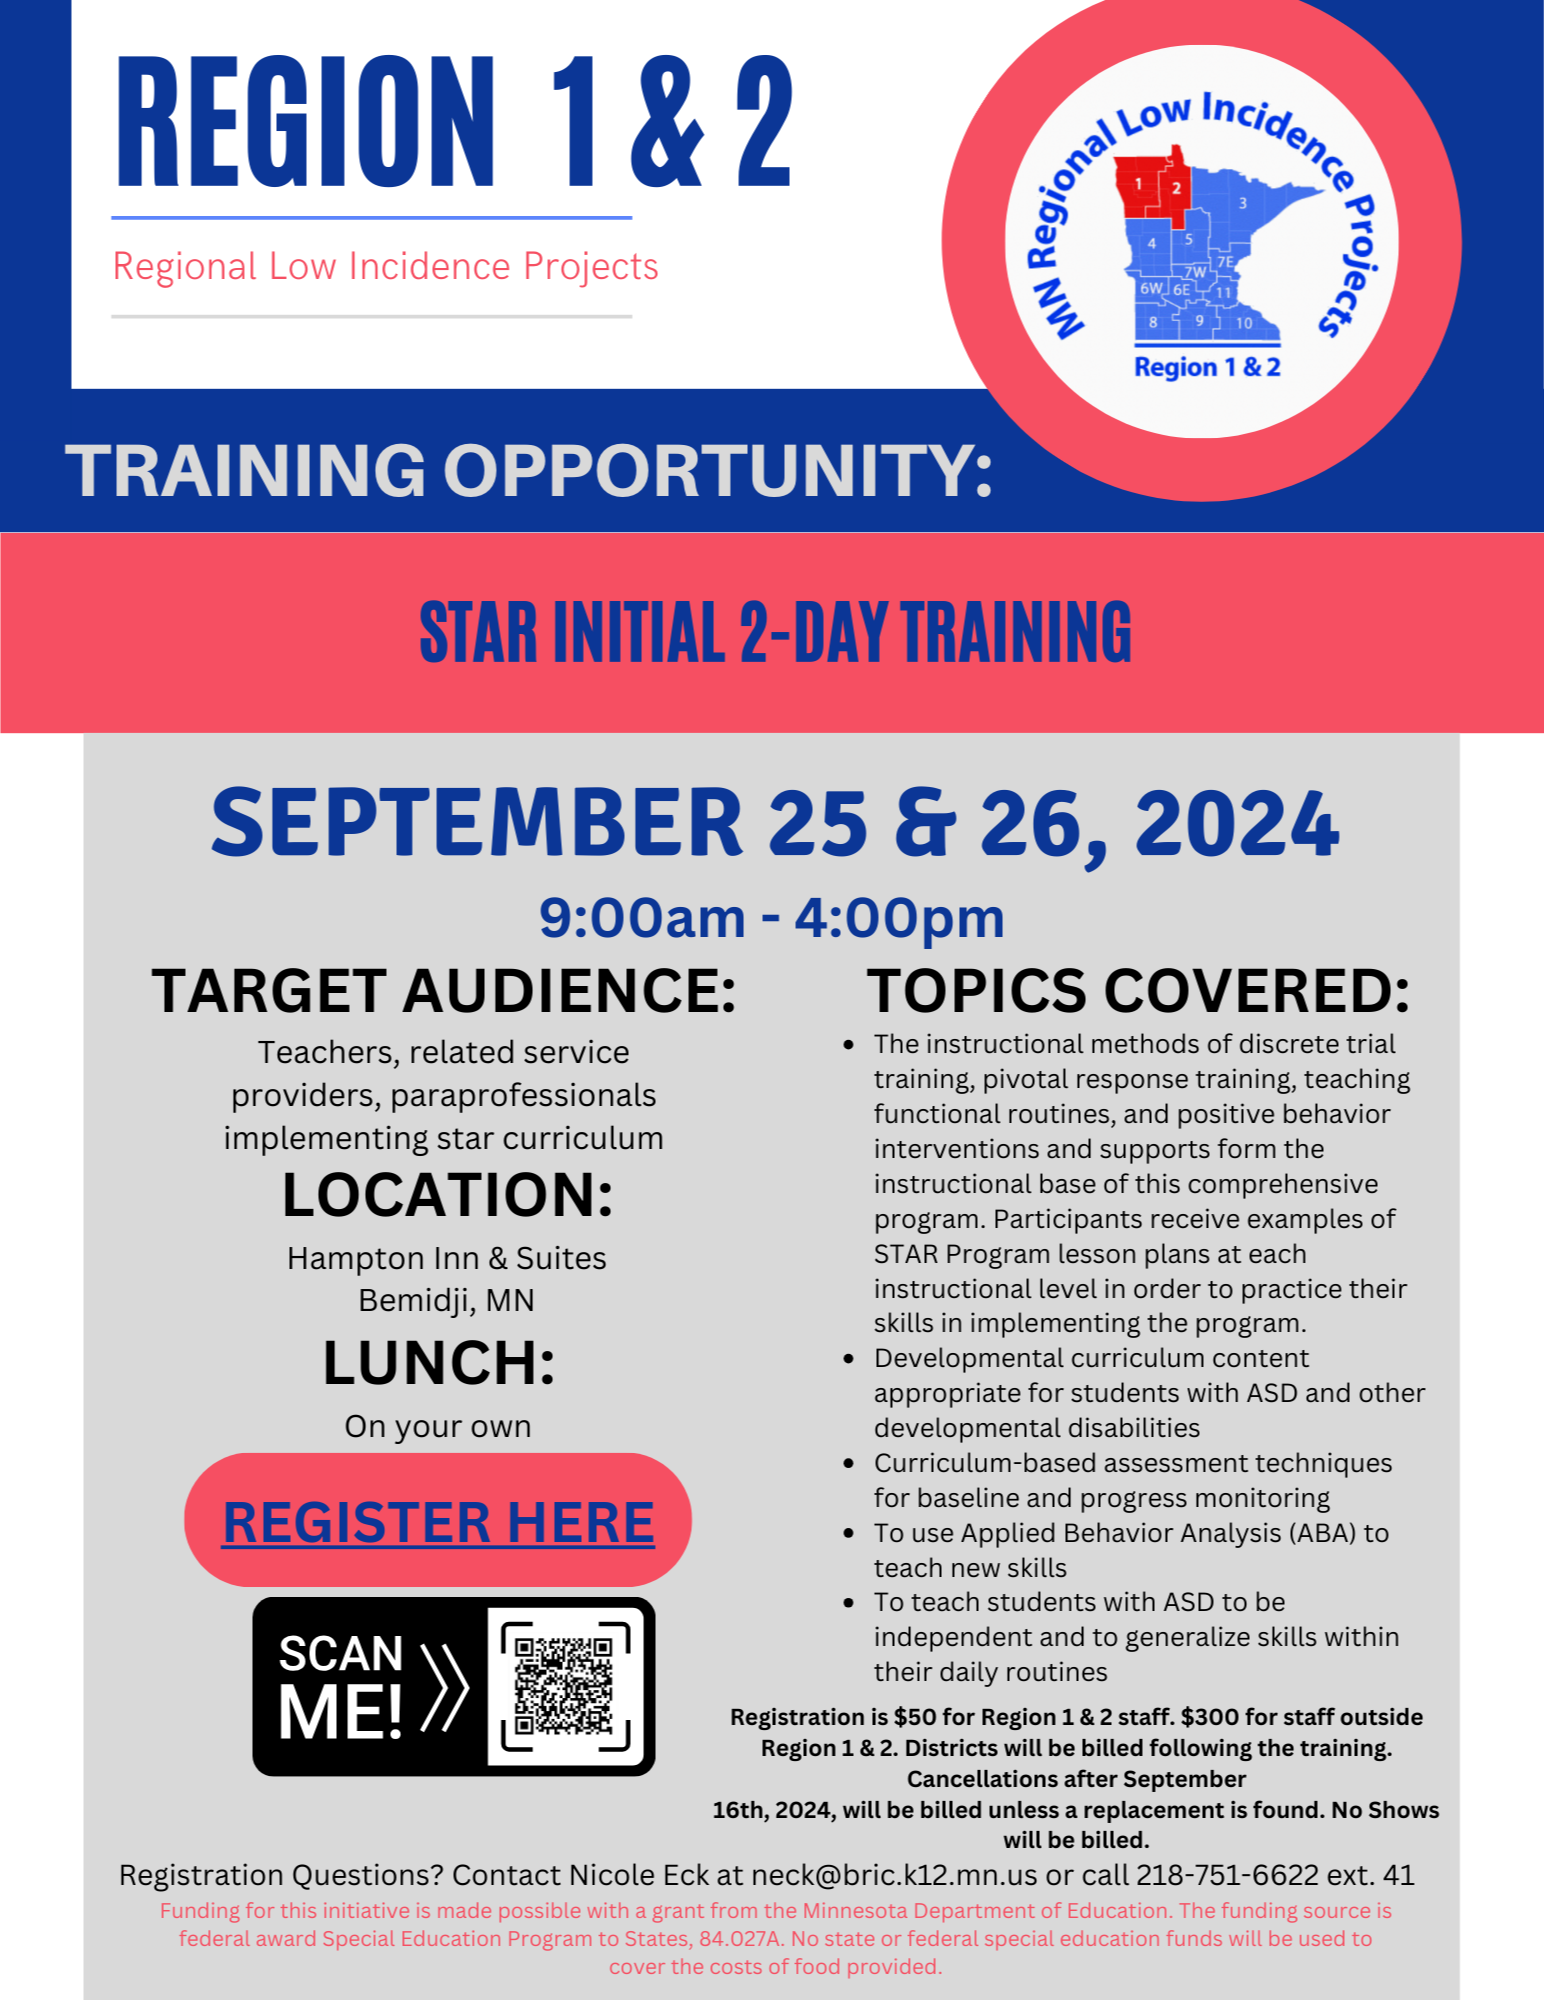 STAR 2-DAY Training SEPTEMBER 25TH & 26TH 2024